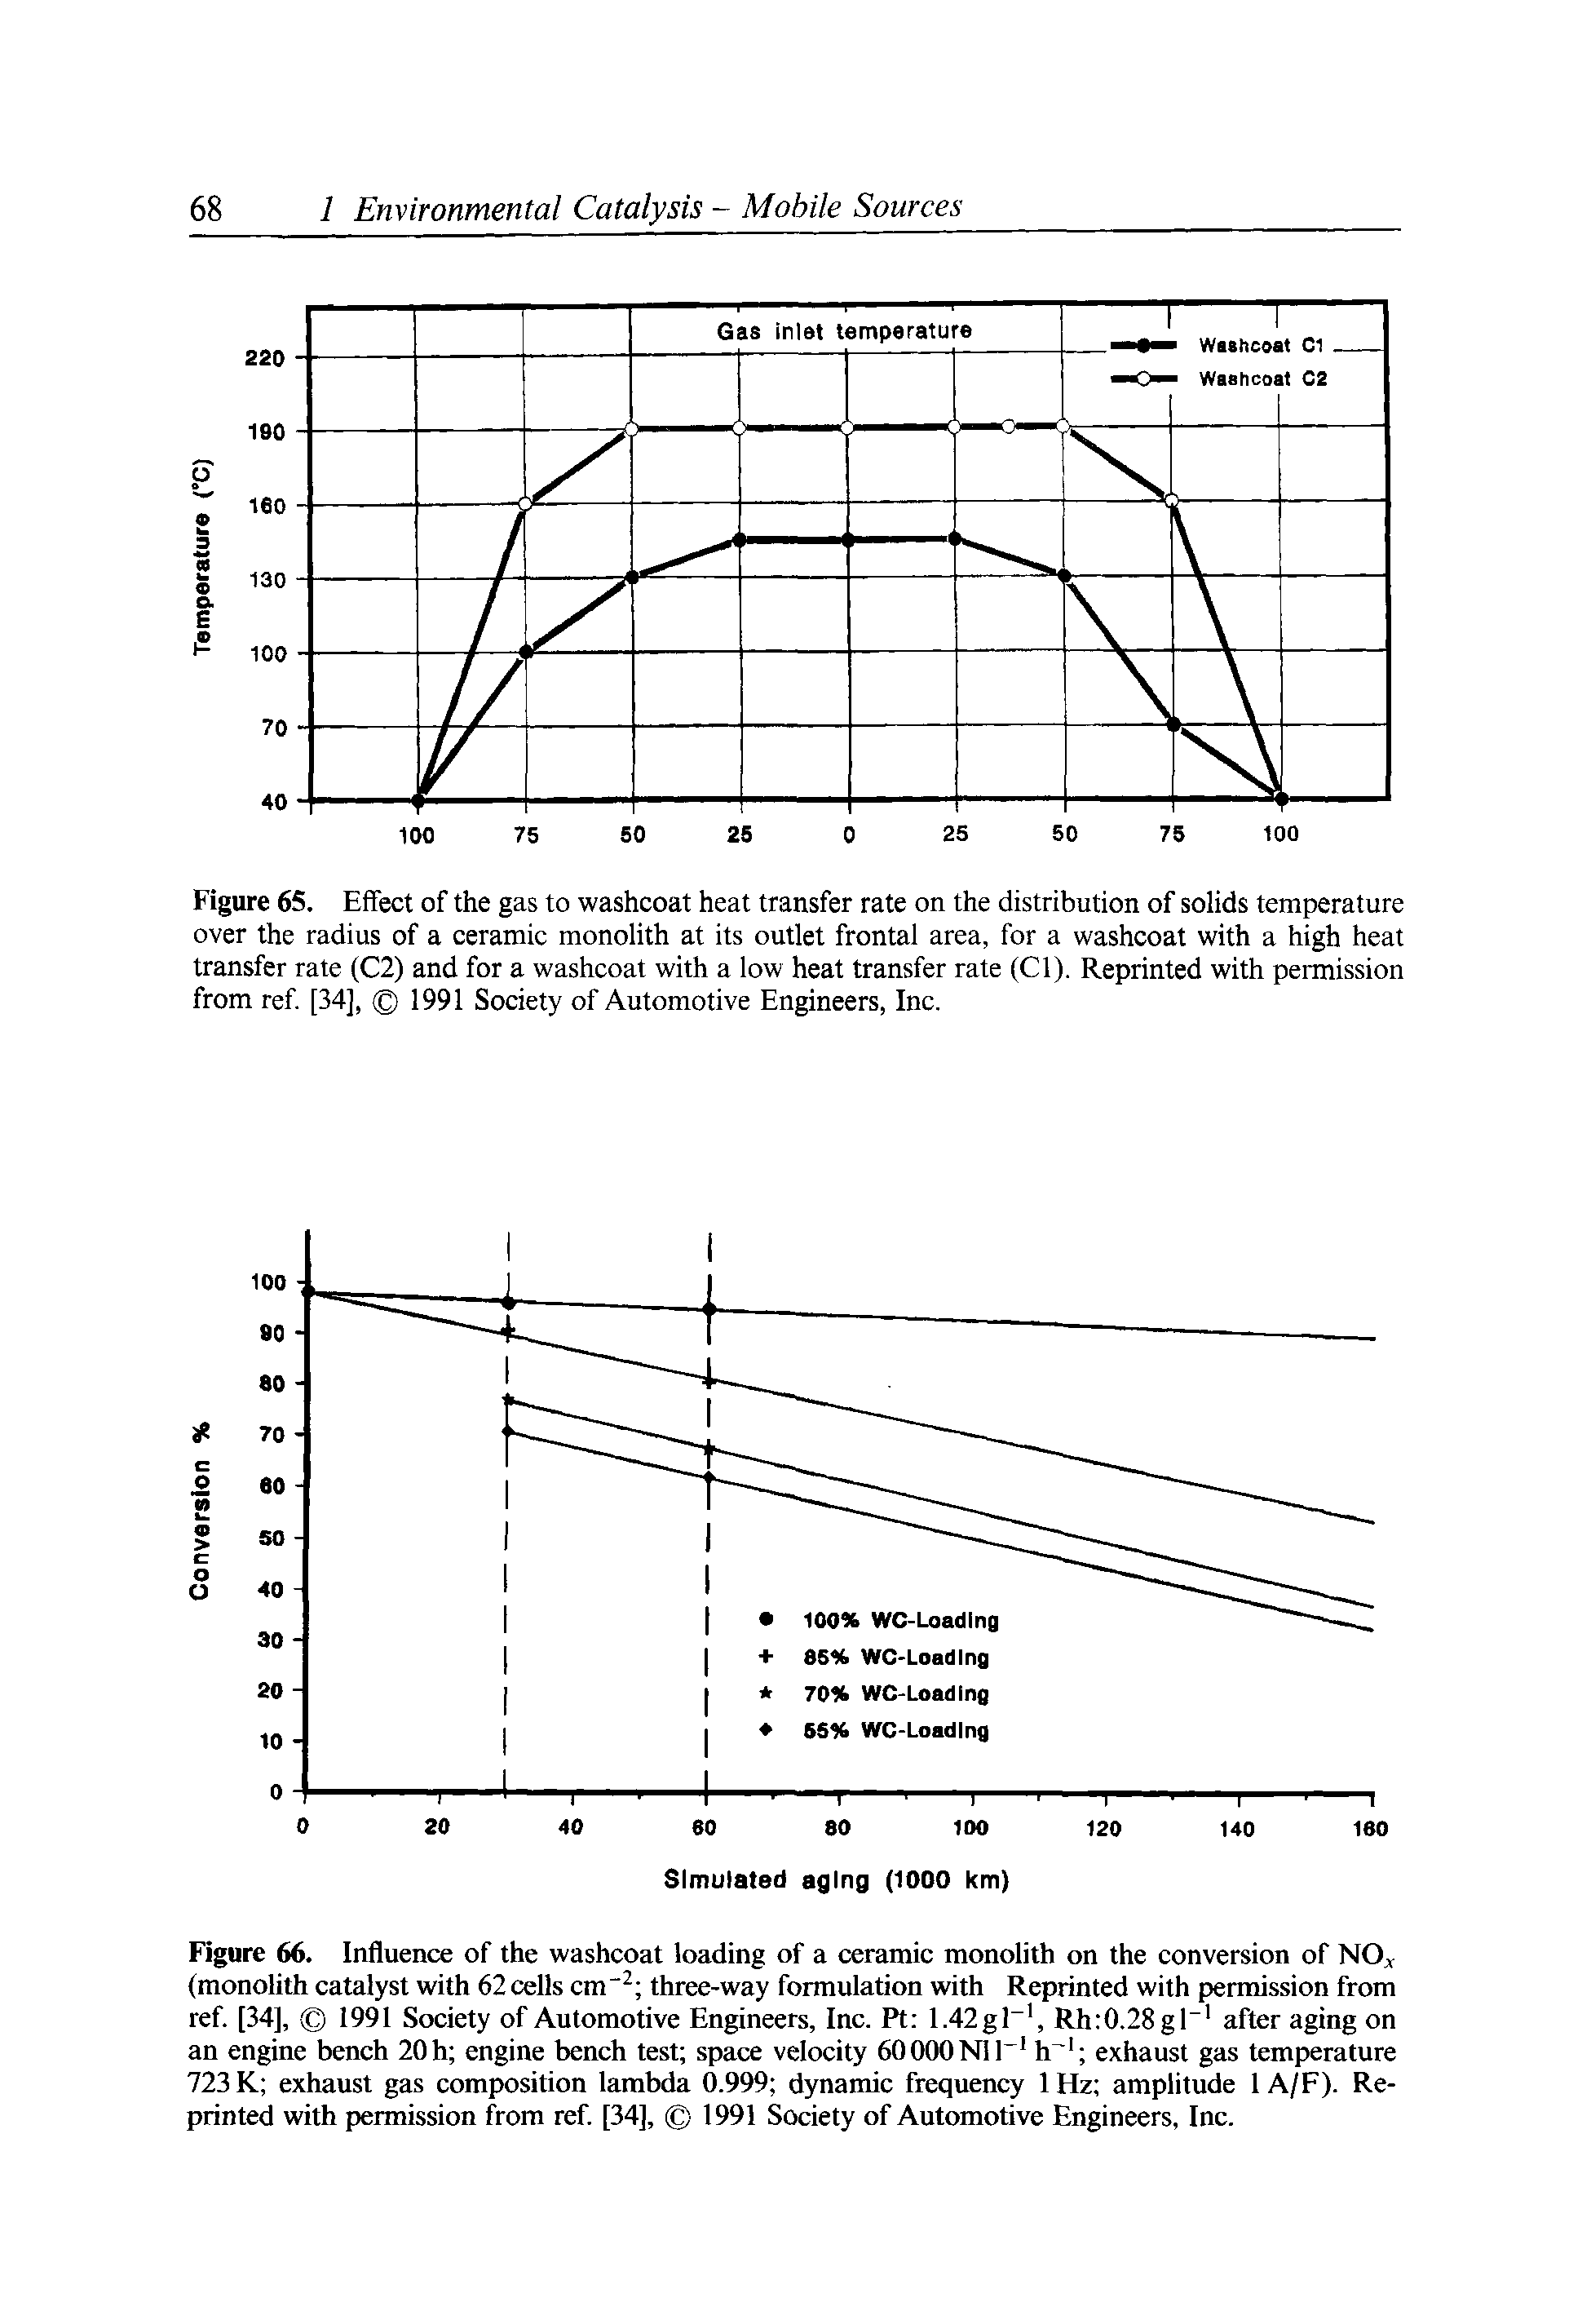 Figure 66. Influence of the washcoat loading of a ceramic monolith on the conversion of NO t (monolith catalyst with 62cells cm" three-way formulation with Reprinted with permission from ref. [34], 1991 Society of Automotive Engineers, Inc. Pt 1.42gl" , Rh 0.28gl" after aging on an engine bench 20 h engine bench test space velocity 60000N1E h exhaust gas temperature 723 K exhaust gas composition lambda 0.999 dynamic frequency 1 Hz amplitude 1 A/F). Reprinted with permission from ref [34], 1991 Society of Automotive Engineers, Inc.